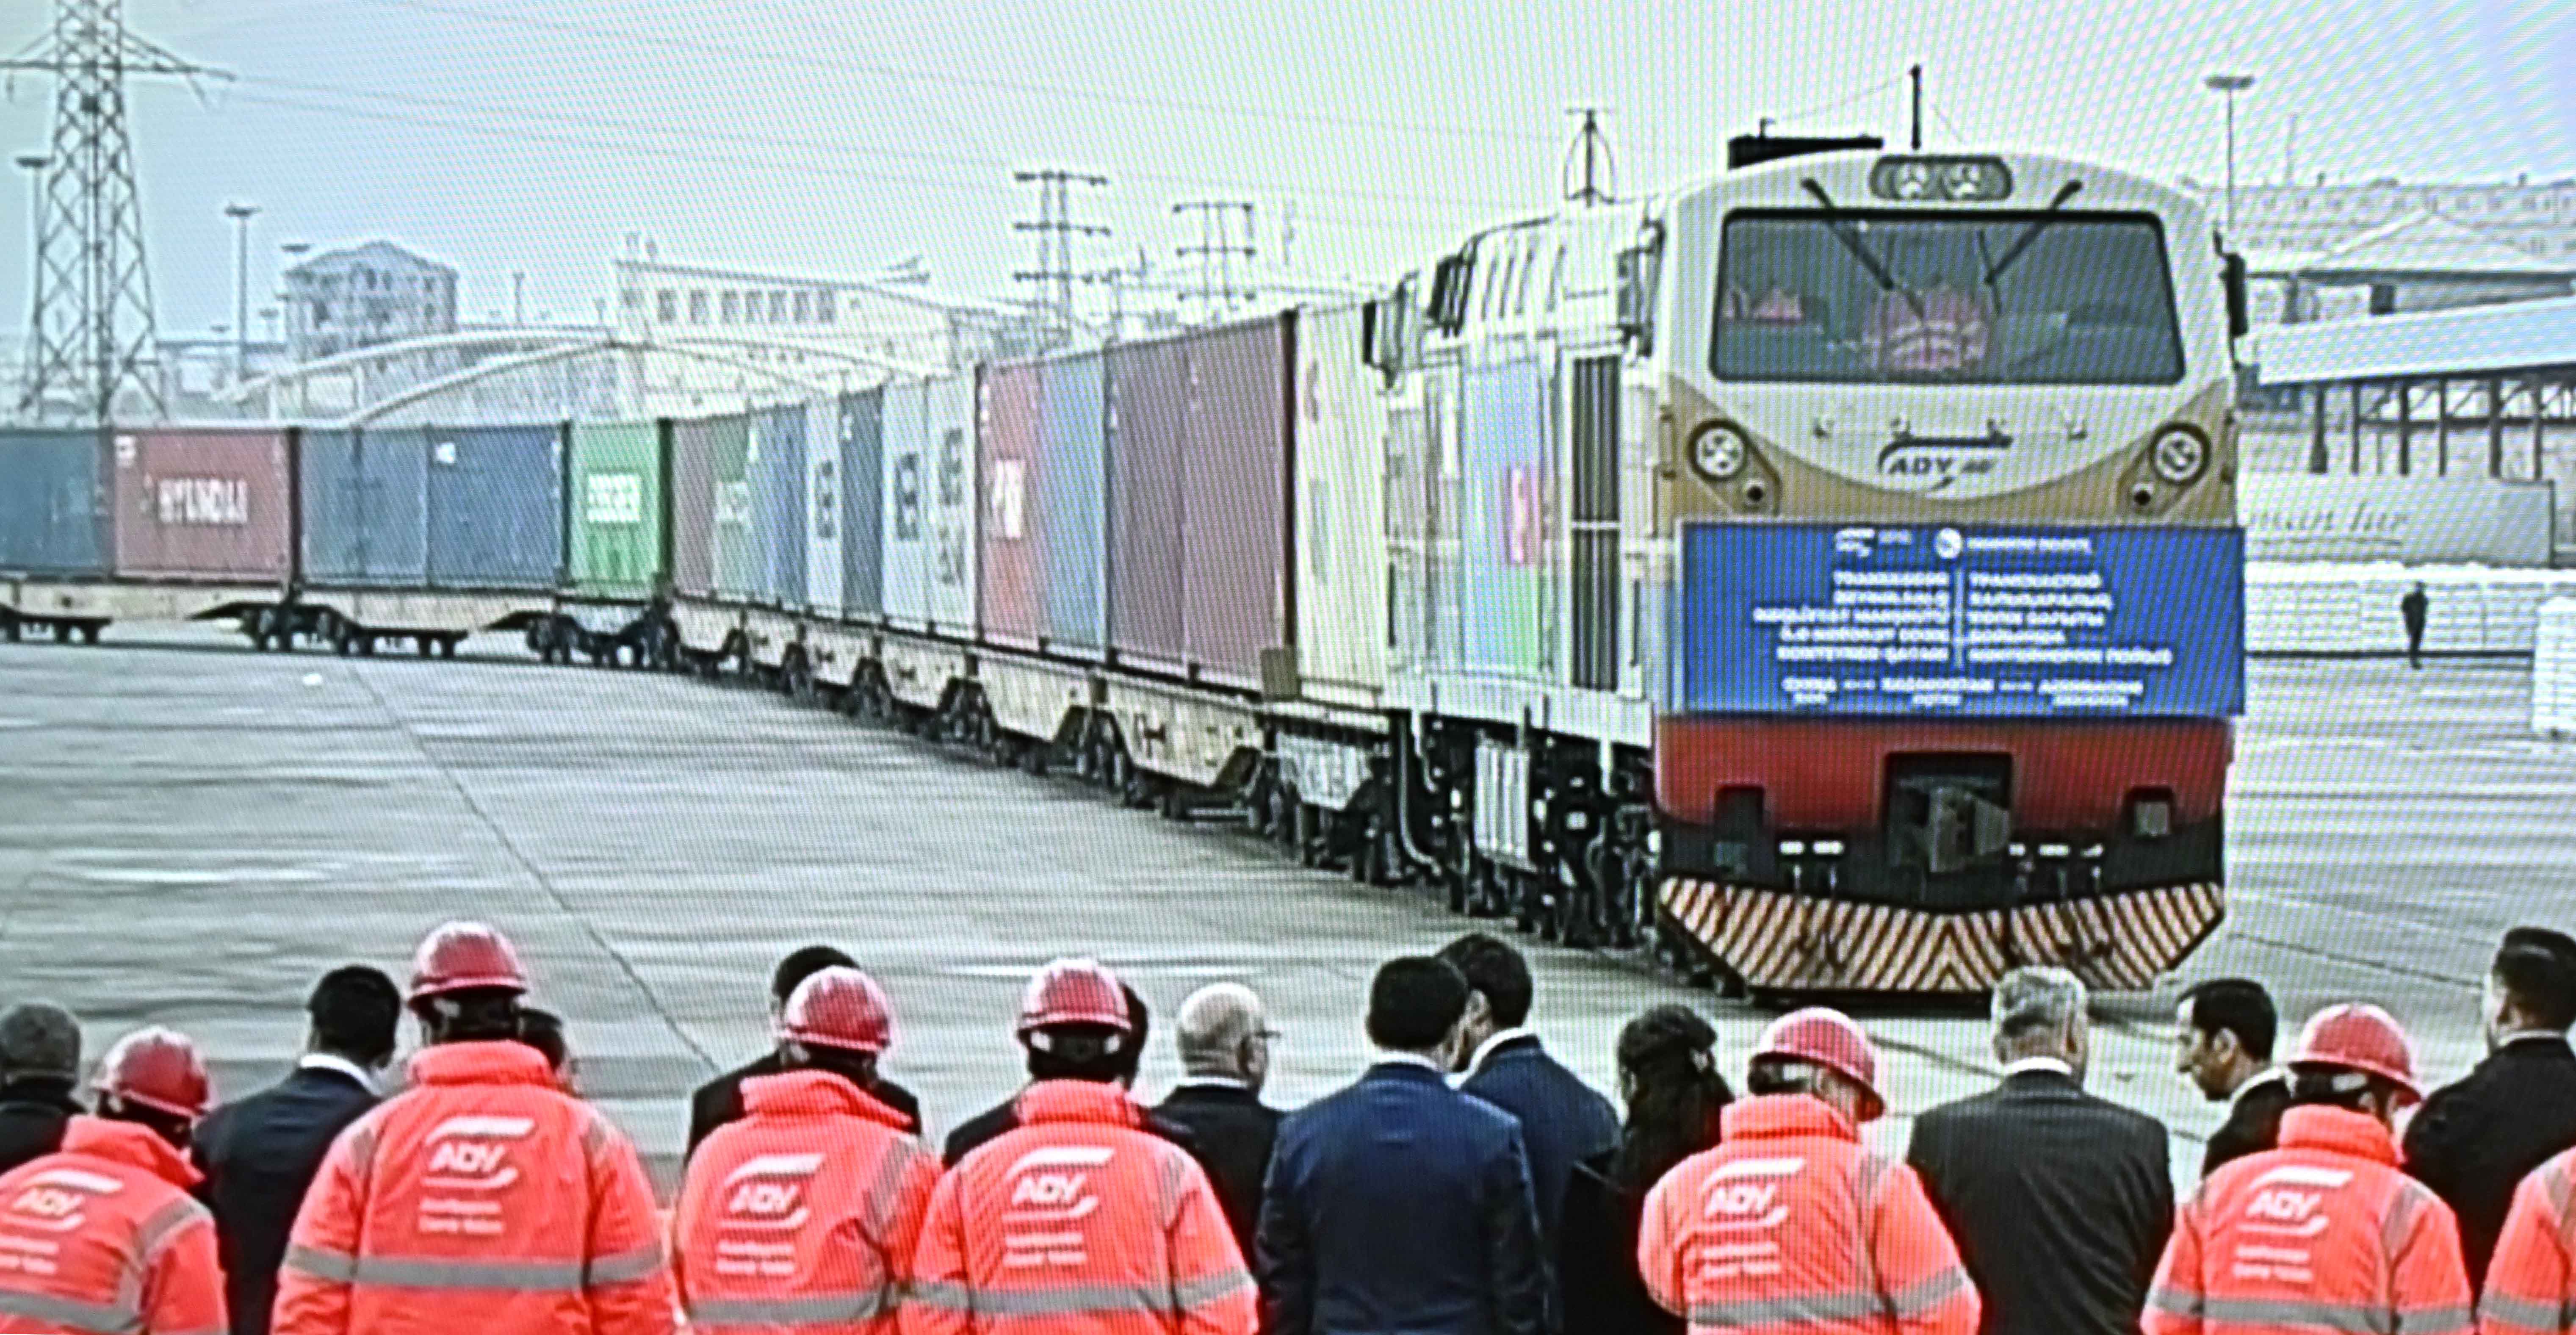 The presidents of Kazakhstan and Azerbaijan took part in the ceremony marking the arrival of a container train from Xi'an to Absheron